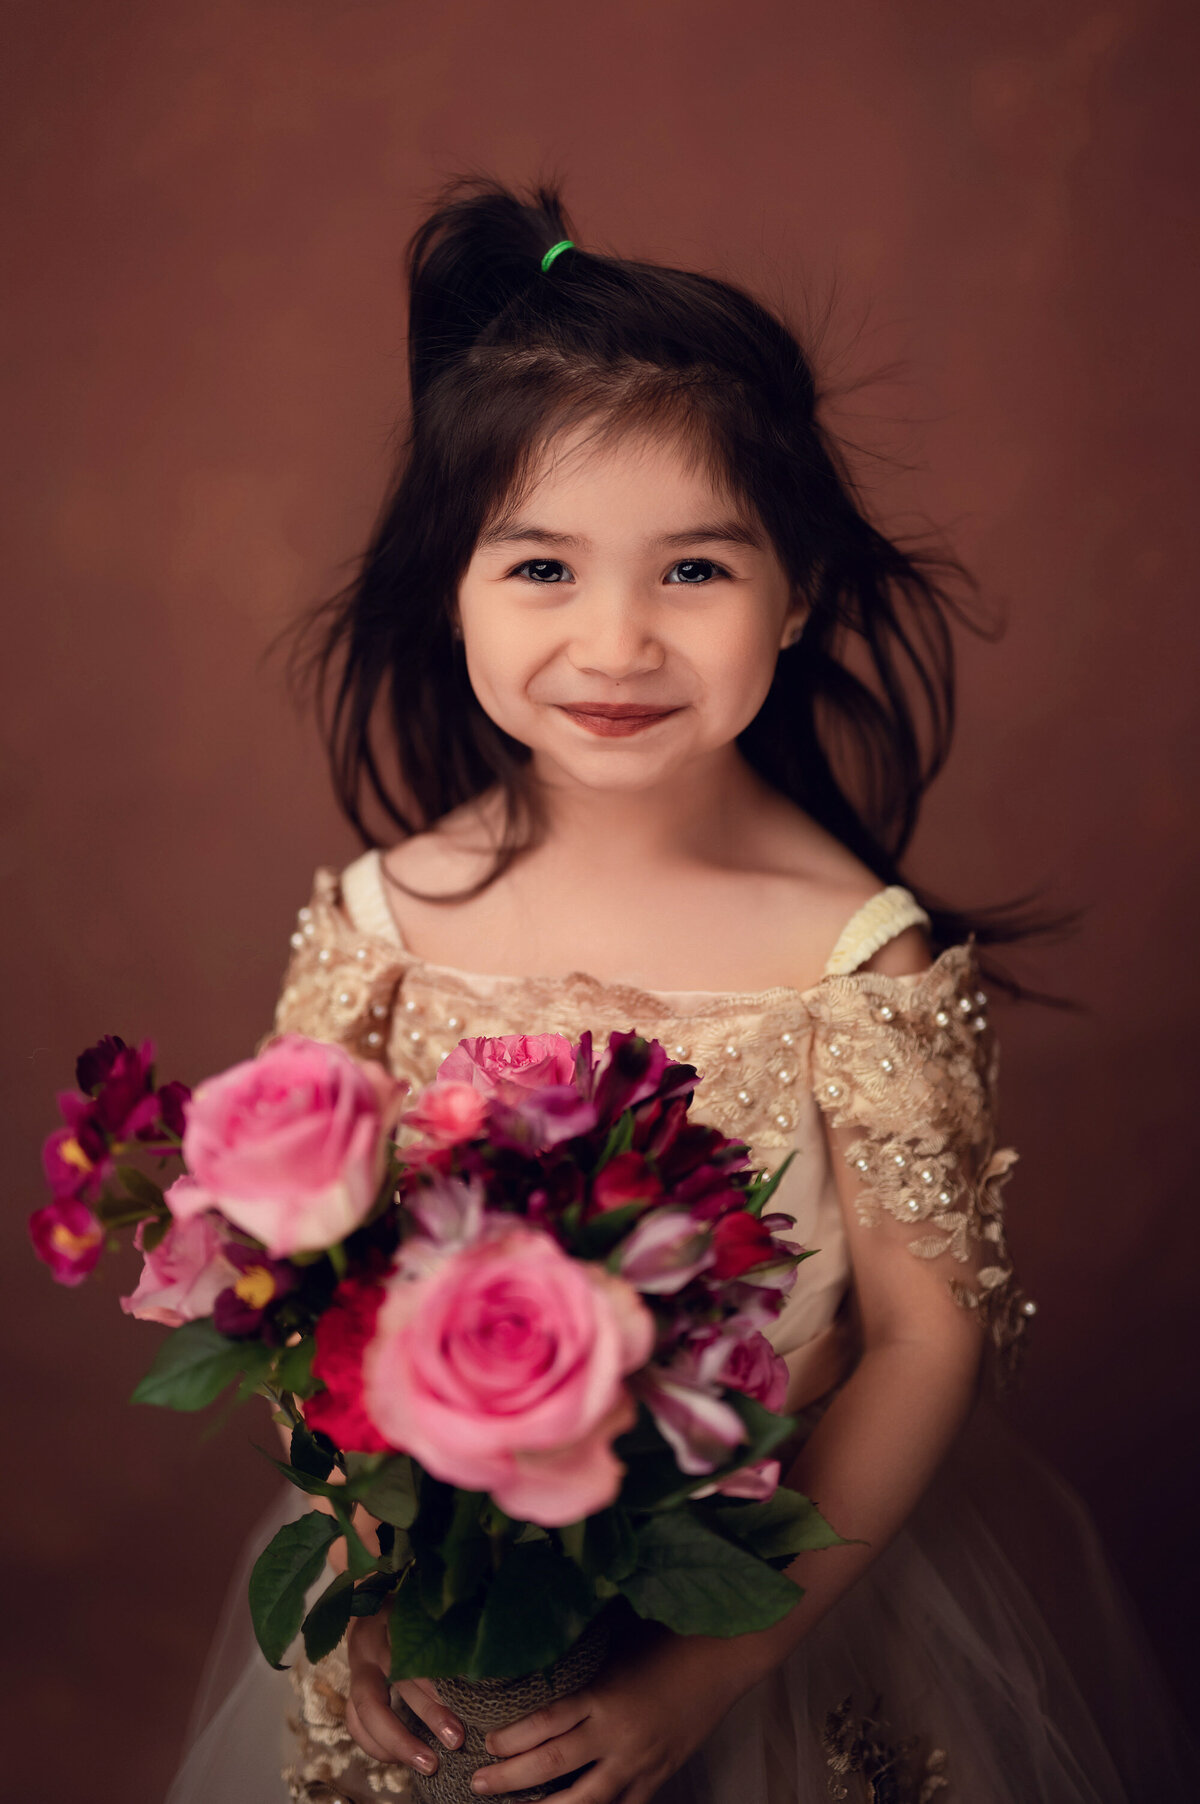 A young girl in a neutral, beaded gown holds a bouquet of pink roses in our Waukesha portrait studio.